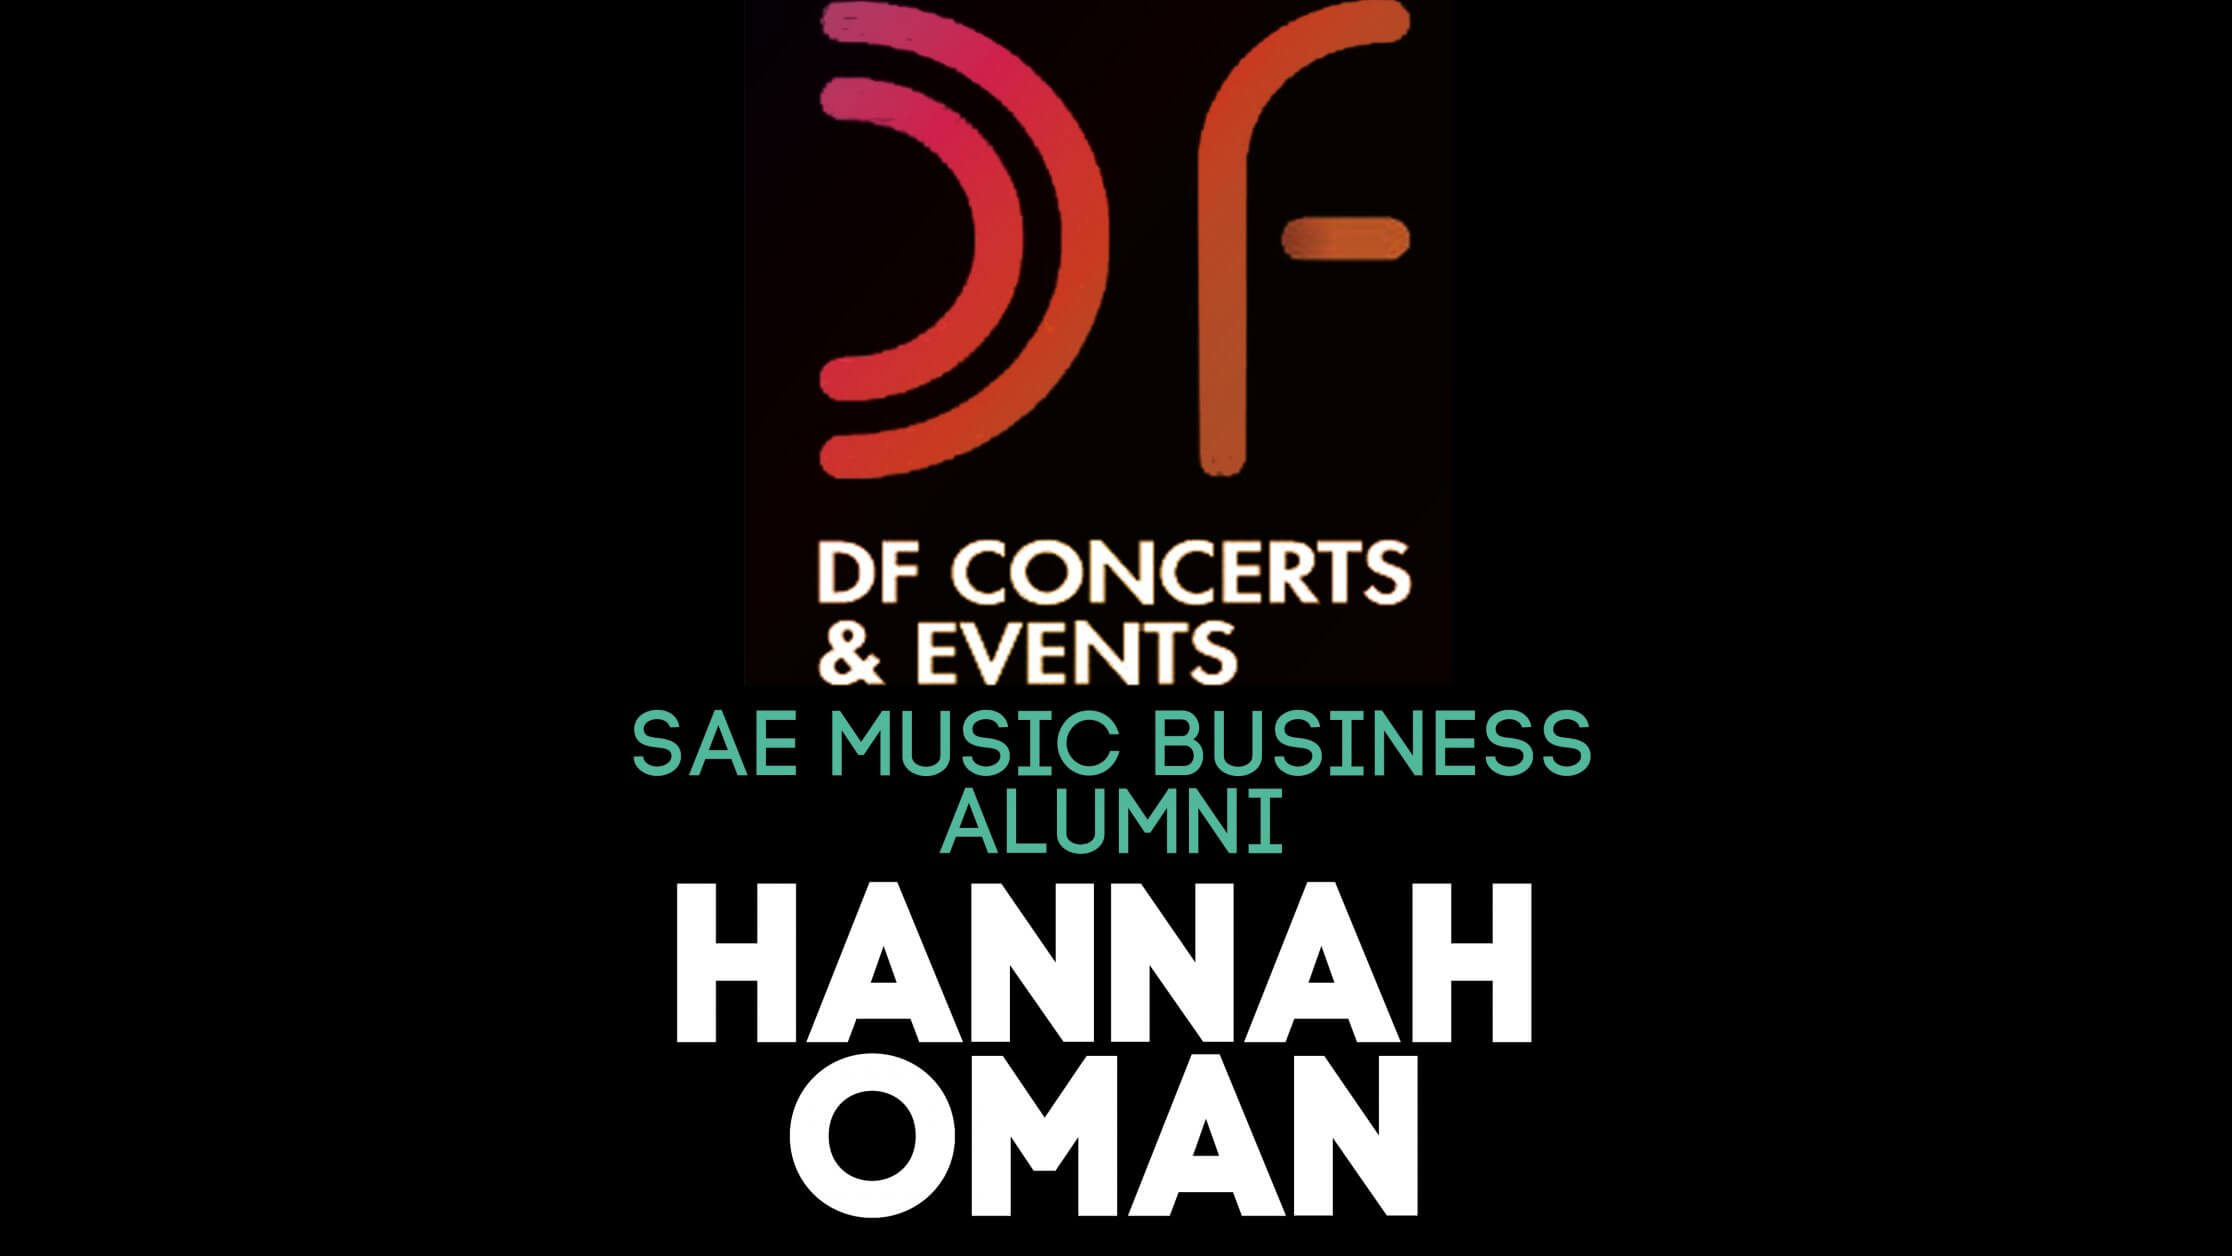 A blog cover picture of SAE Music Business alumni, Hannah Oman, talking about how to get a job at DF concerts.